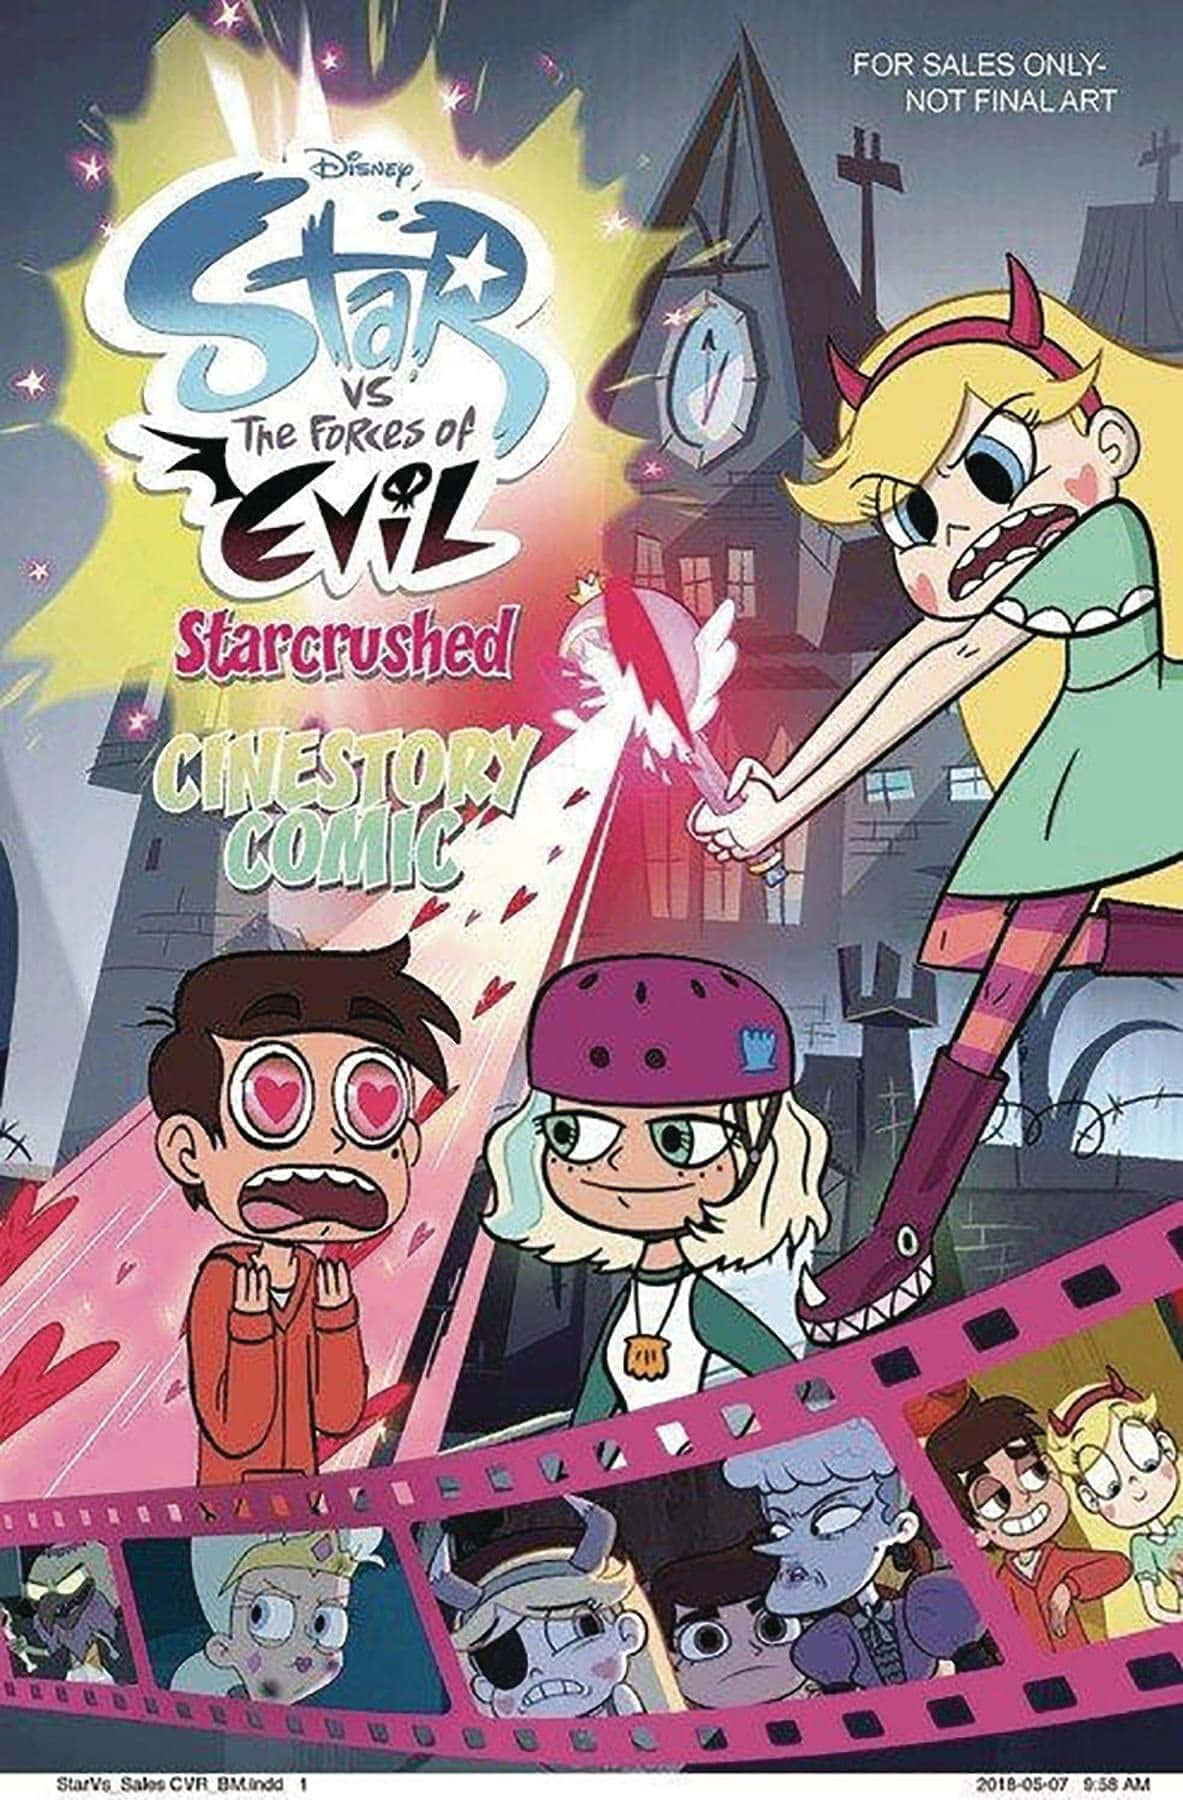 Star Butterfly and Marco Diaz emerge victorious in Star Vs The Forces Of Evil